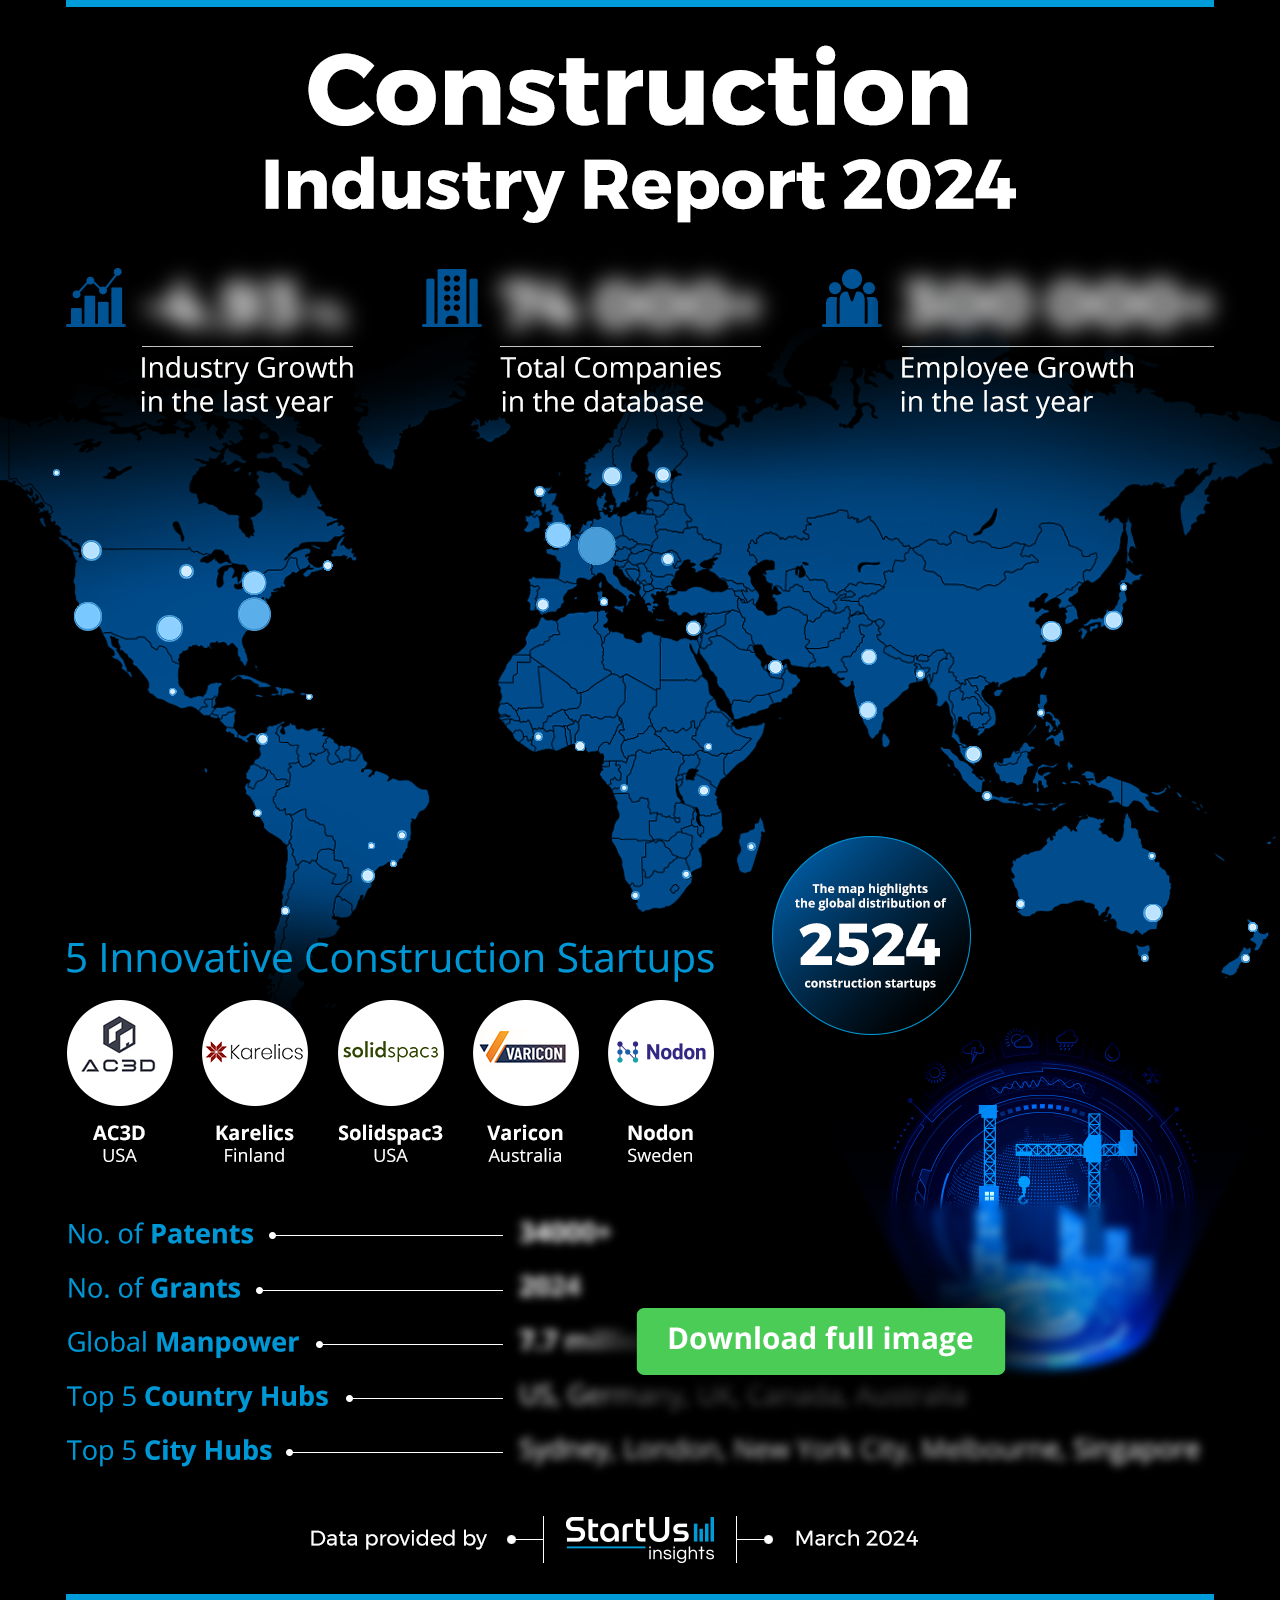 Construction-Industry-Report-HeatMap-Blurred-StartUs-Insights-noresize